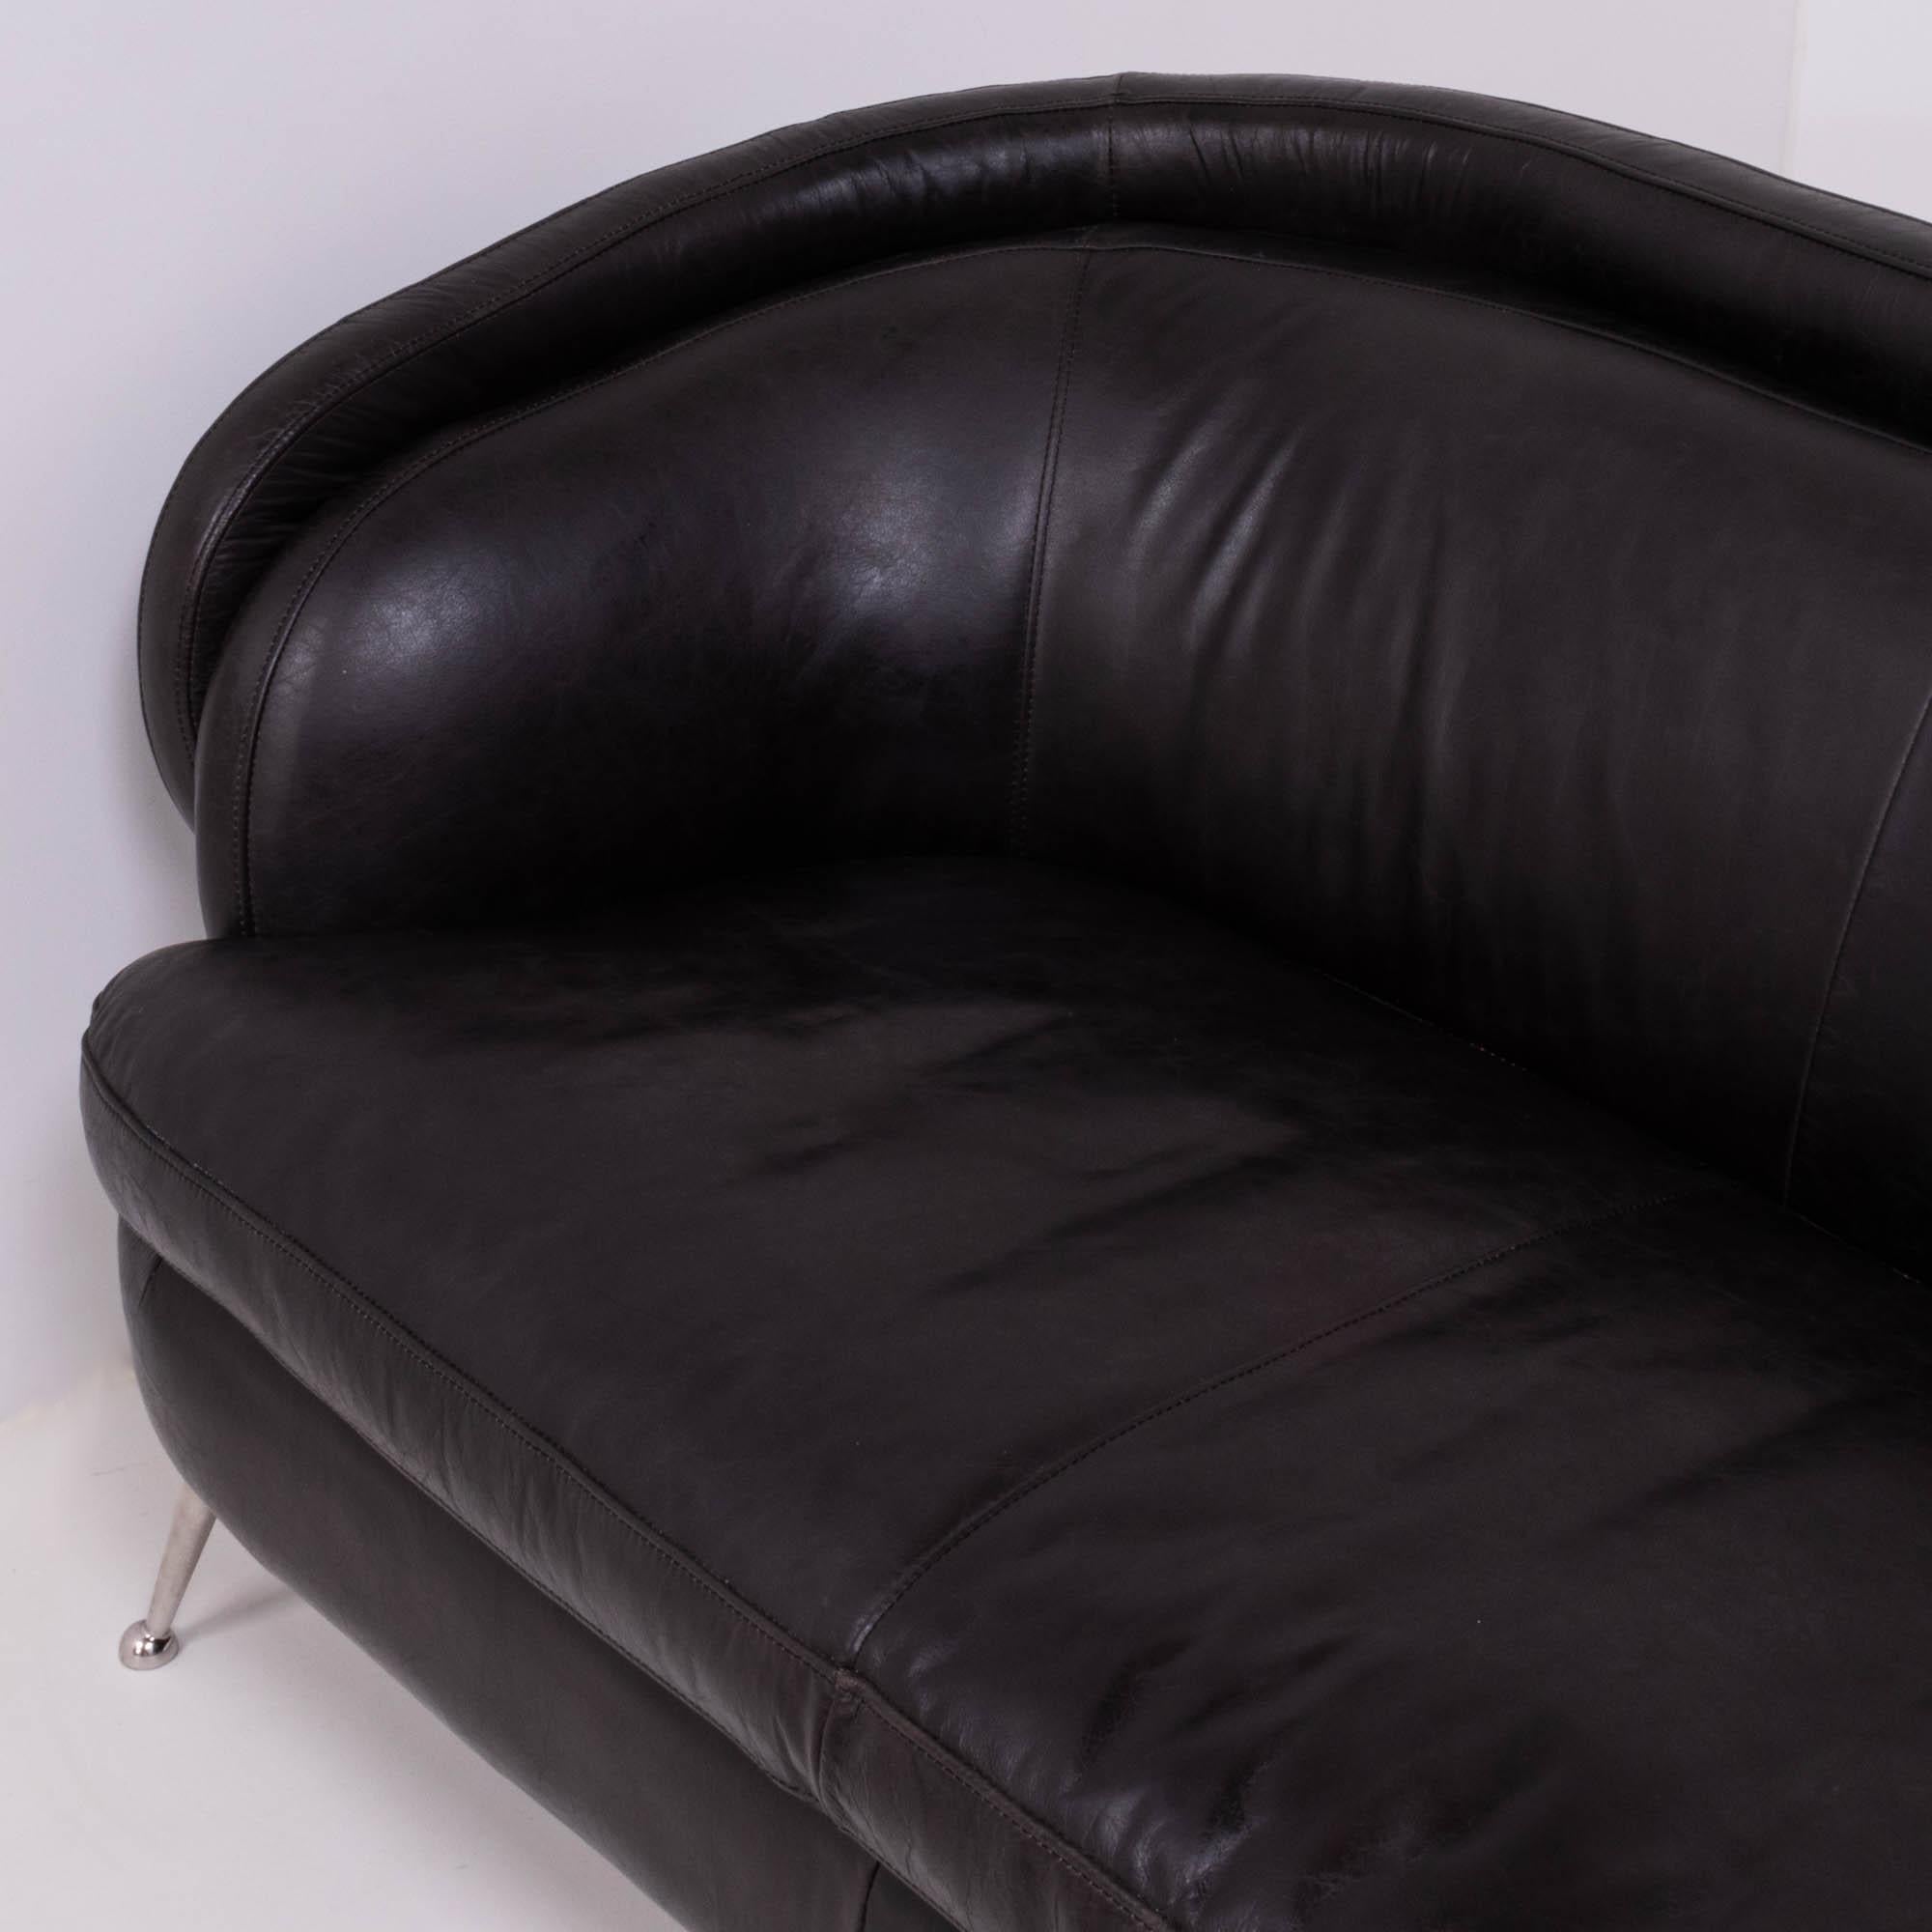 Vintage Italian Curved Black Three Seater Leather Sofa, 1960s For Sale 1